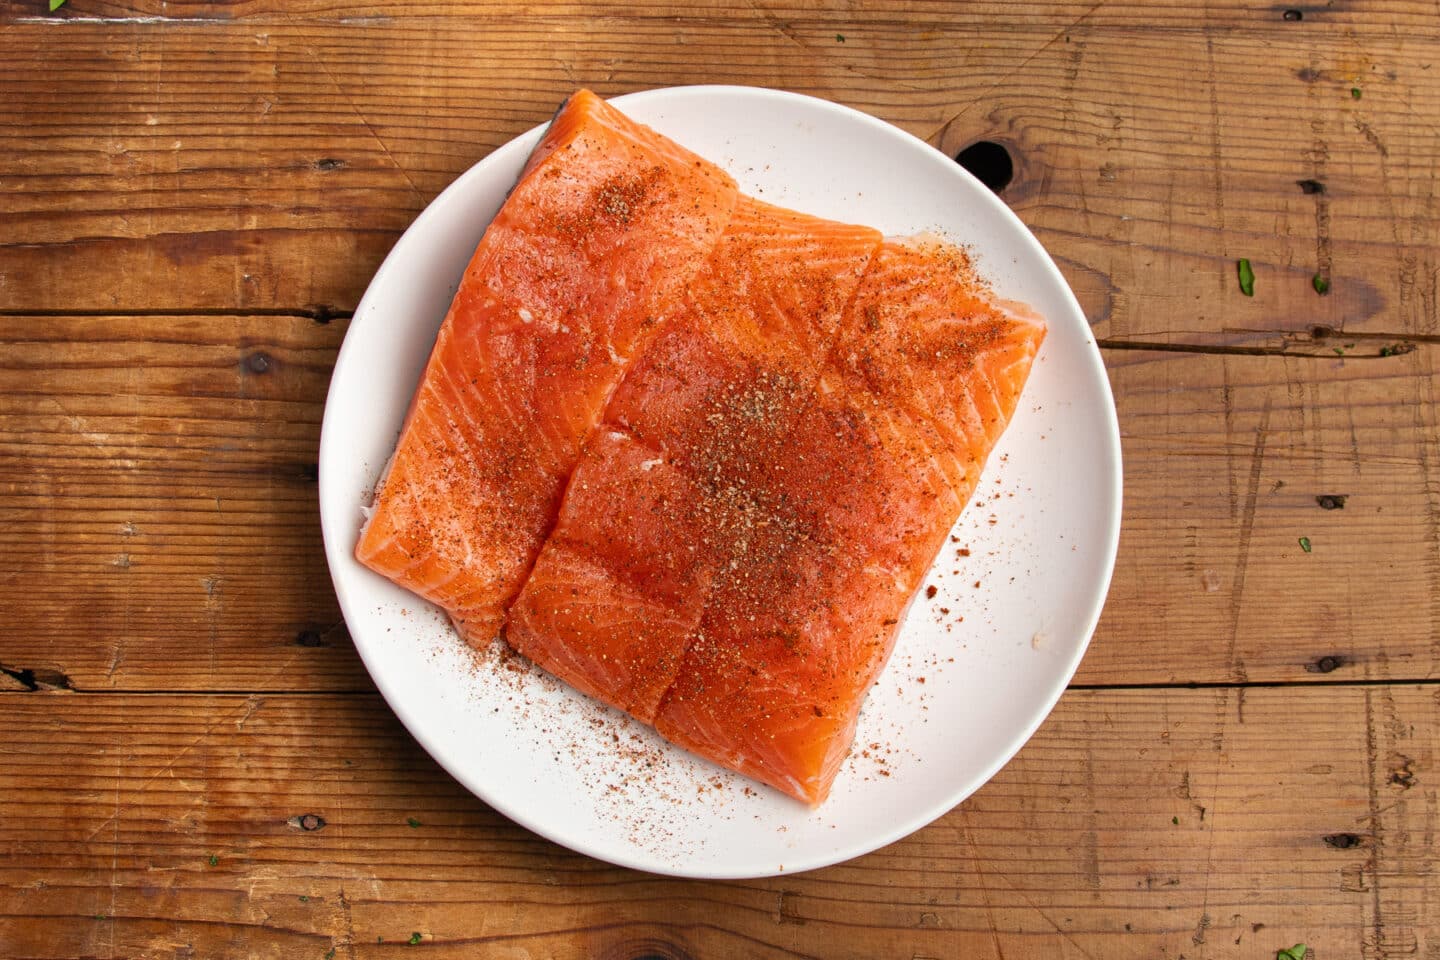 This is a picture of salmon filets with seasoning on a plate.